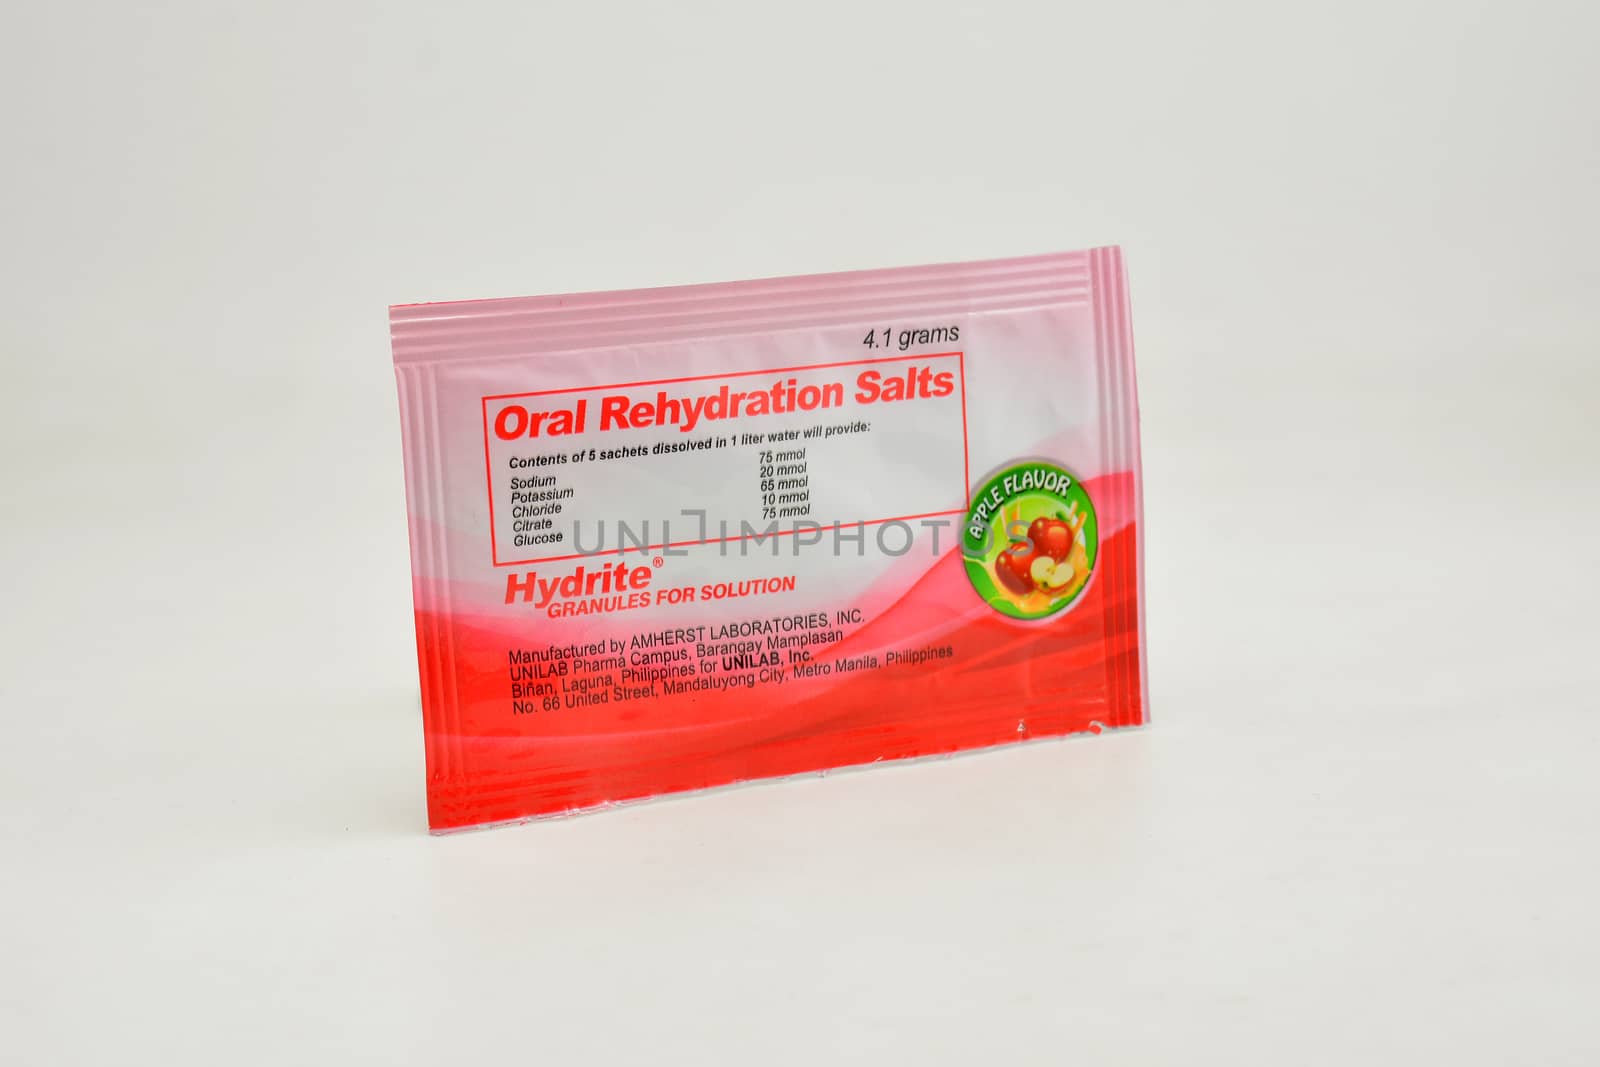 MANILA, PH - SEPT 10 - Oral rehydration salts hydrite apple flavor on September 10, 2020 in Manila, Philippines.